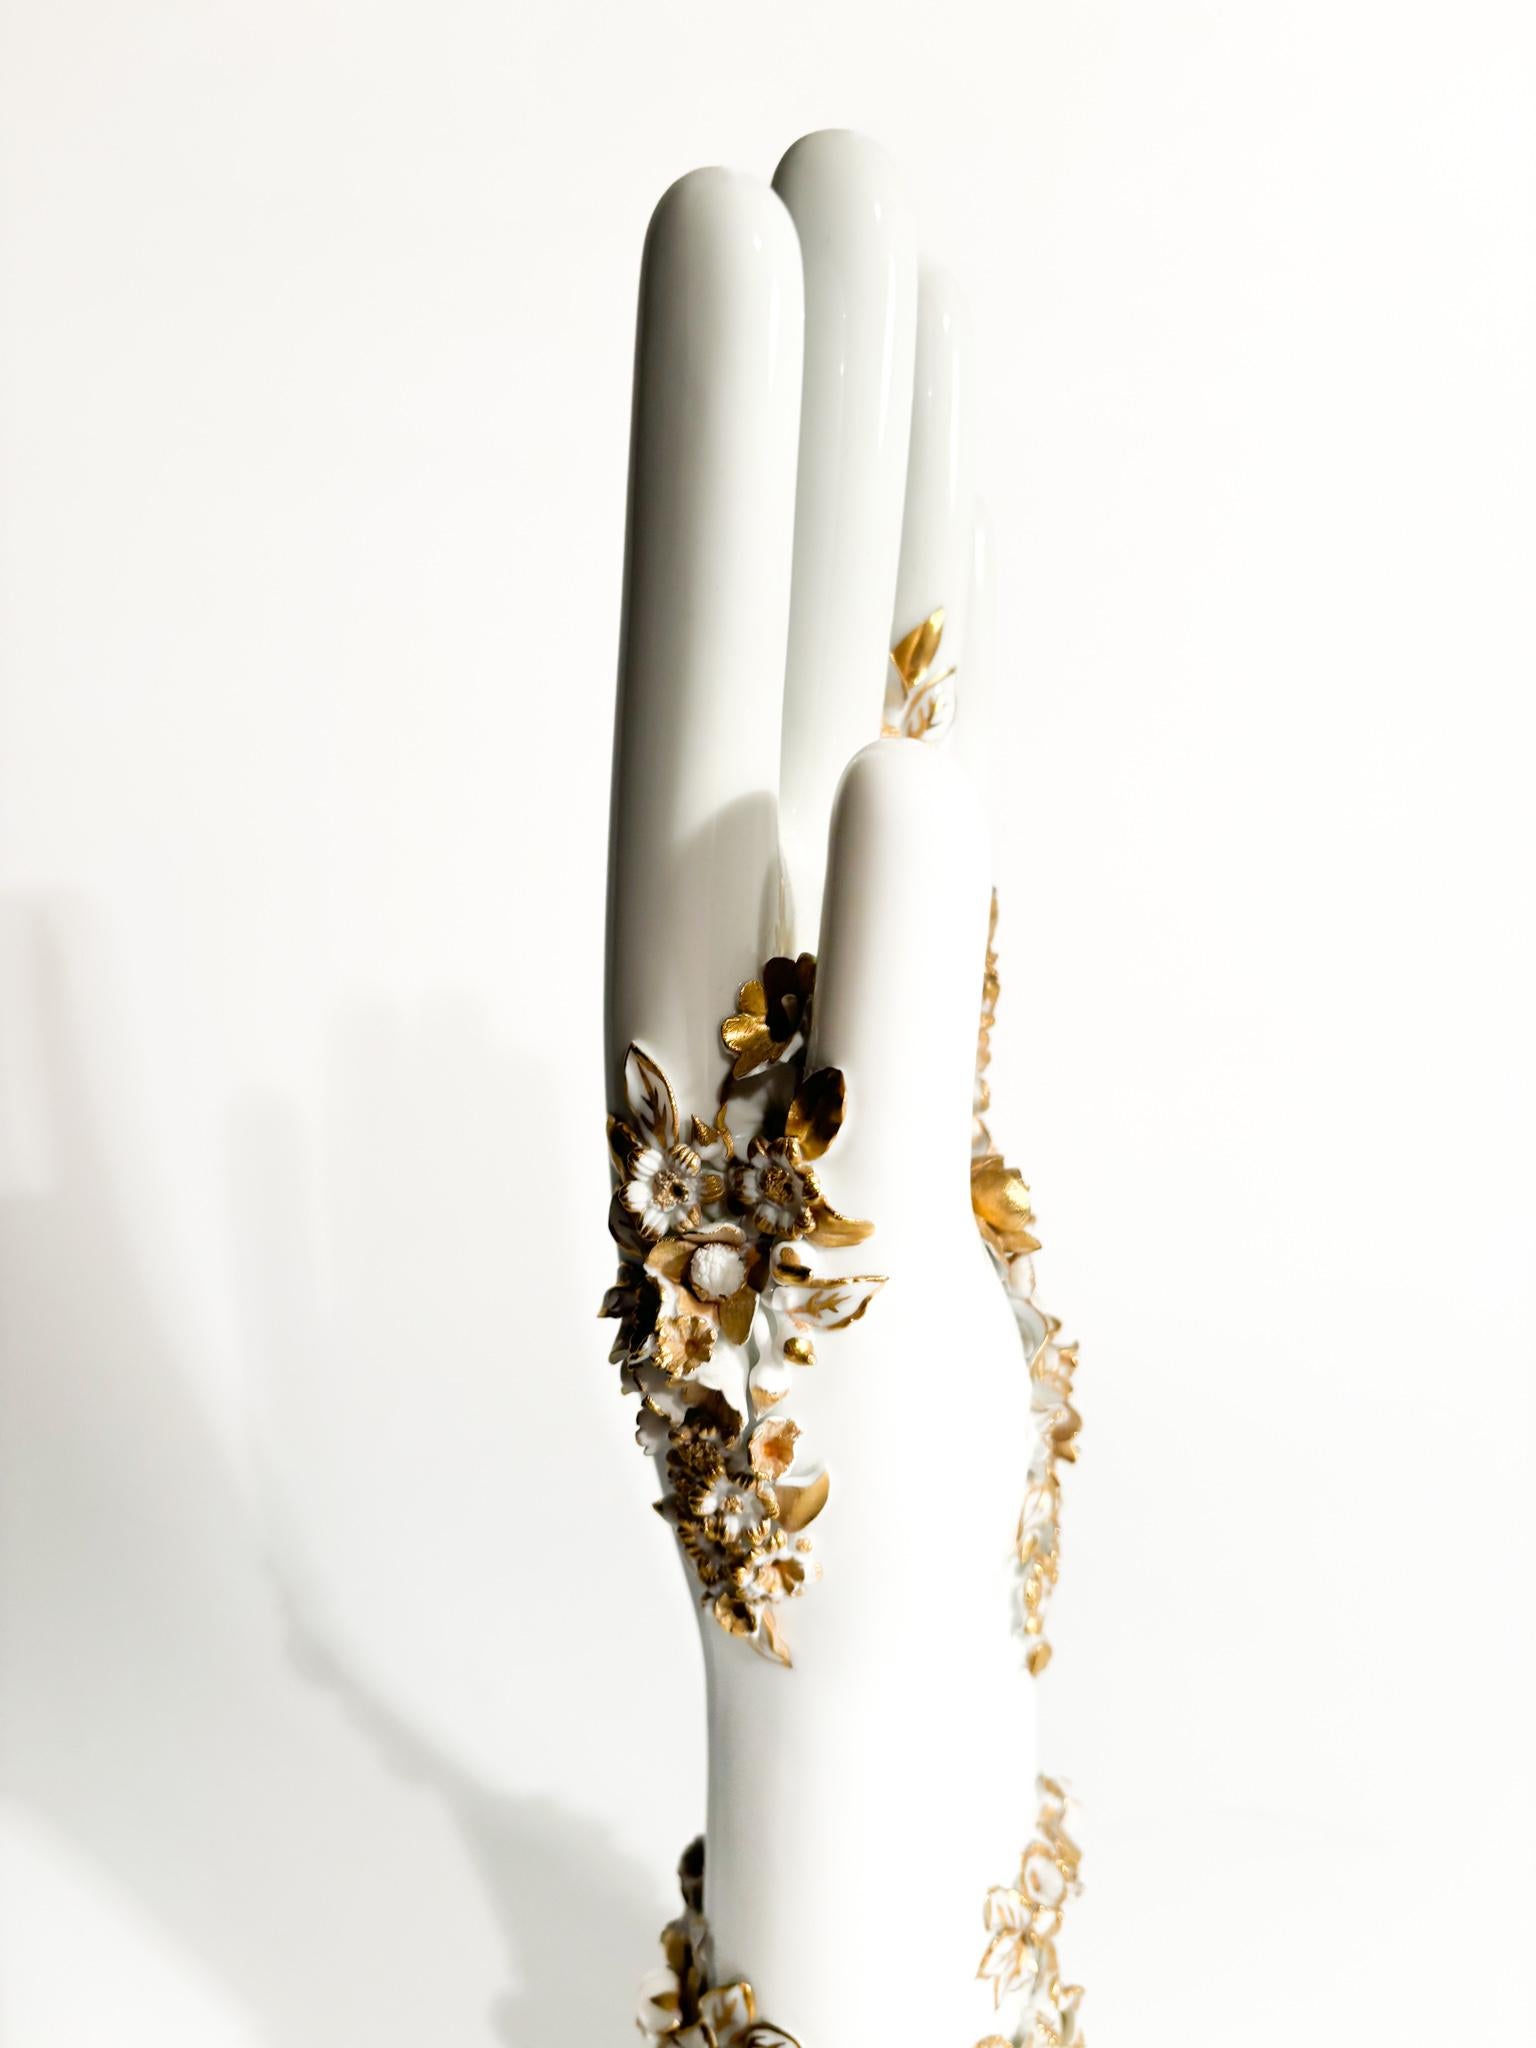 Ponti White and Gold Flowered Hand Art by Gio Ponti for Richard Ginori 1980s For Sale 3